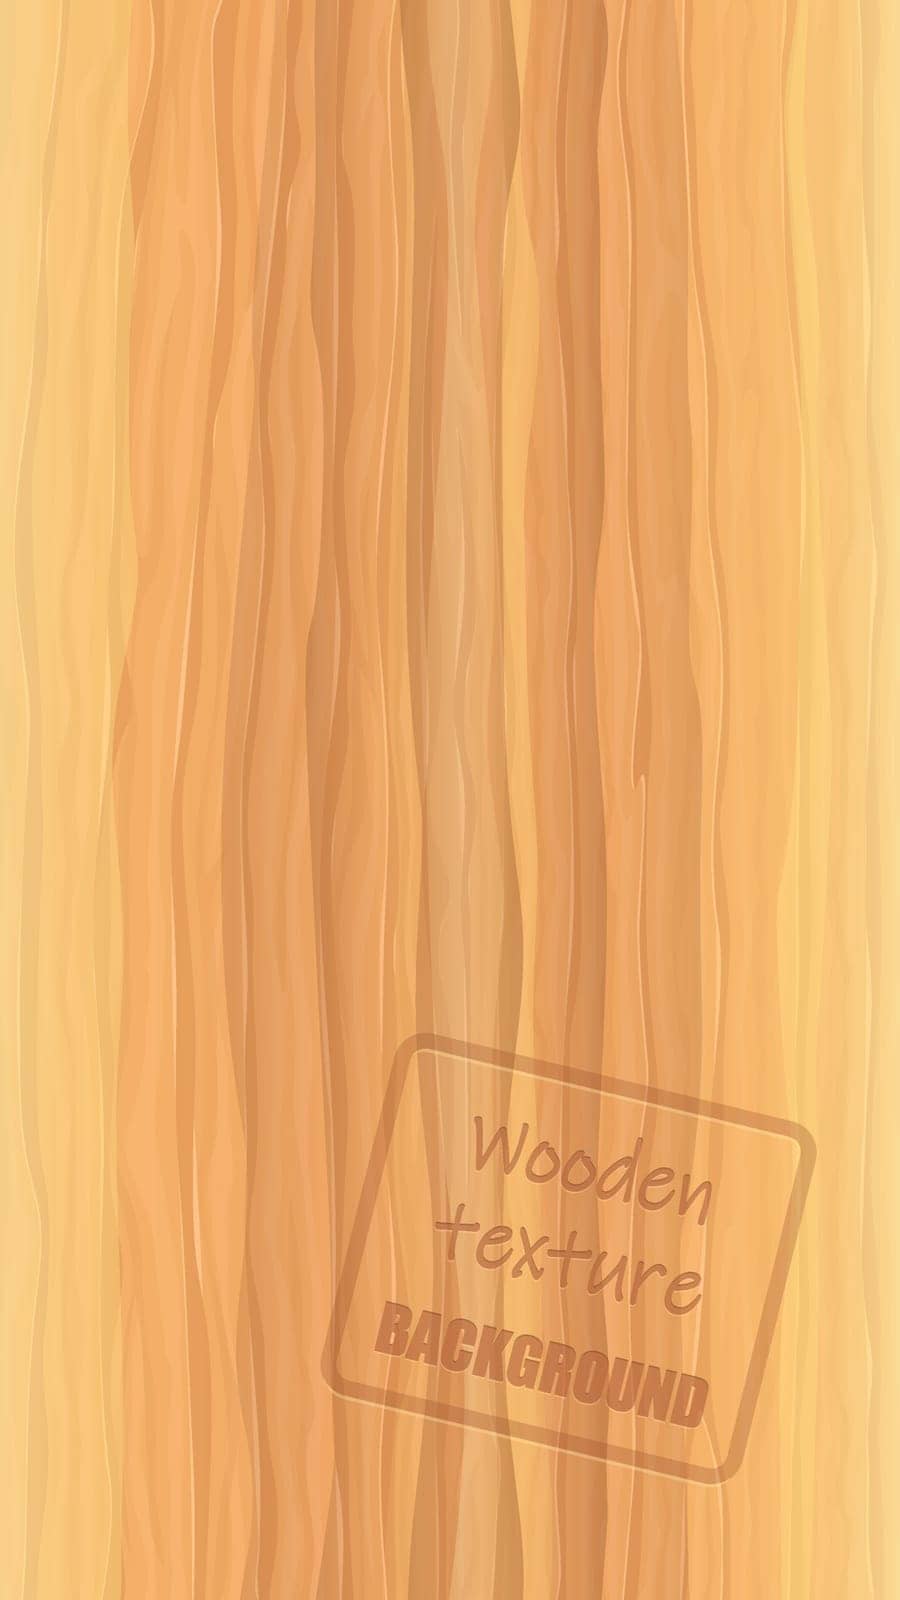 illustration of realistic wooden plank front view vertical background